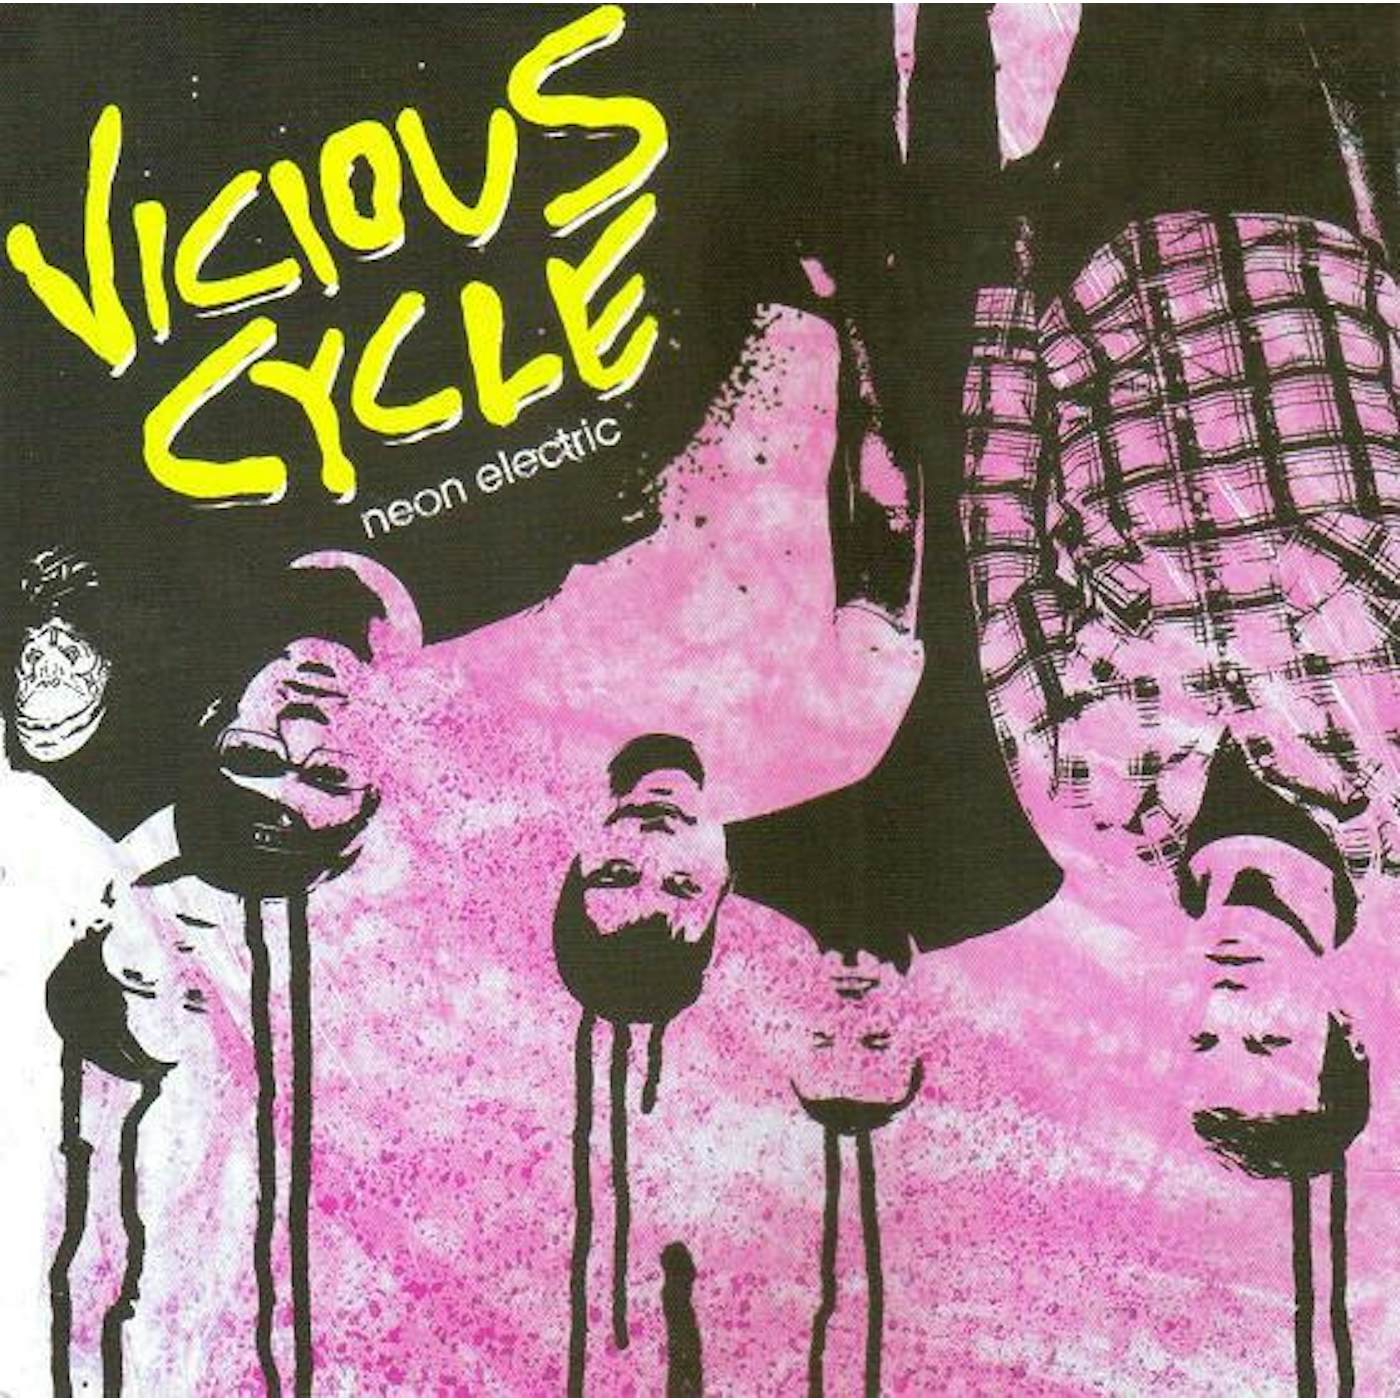 Vicious Cycle – Neon Electric 7"